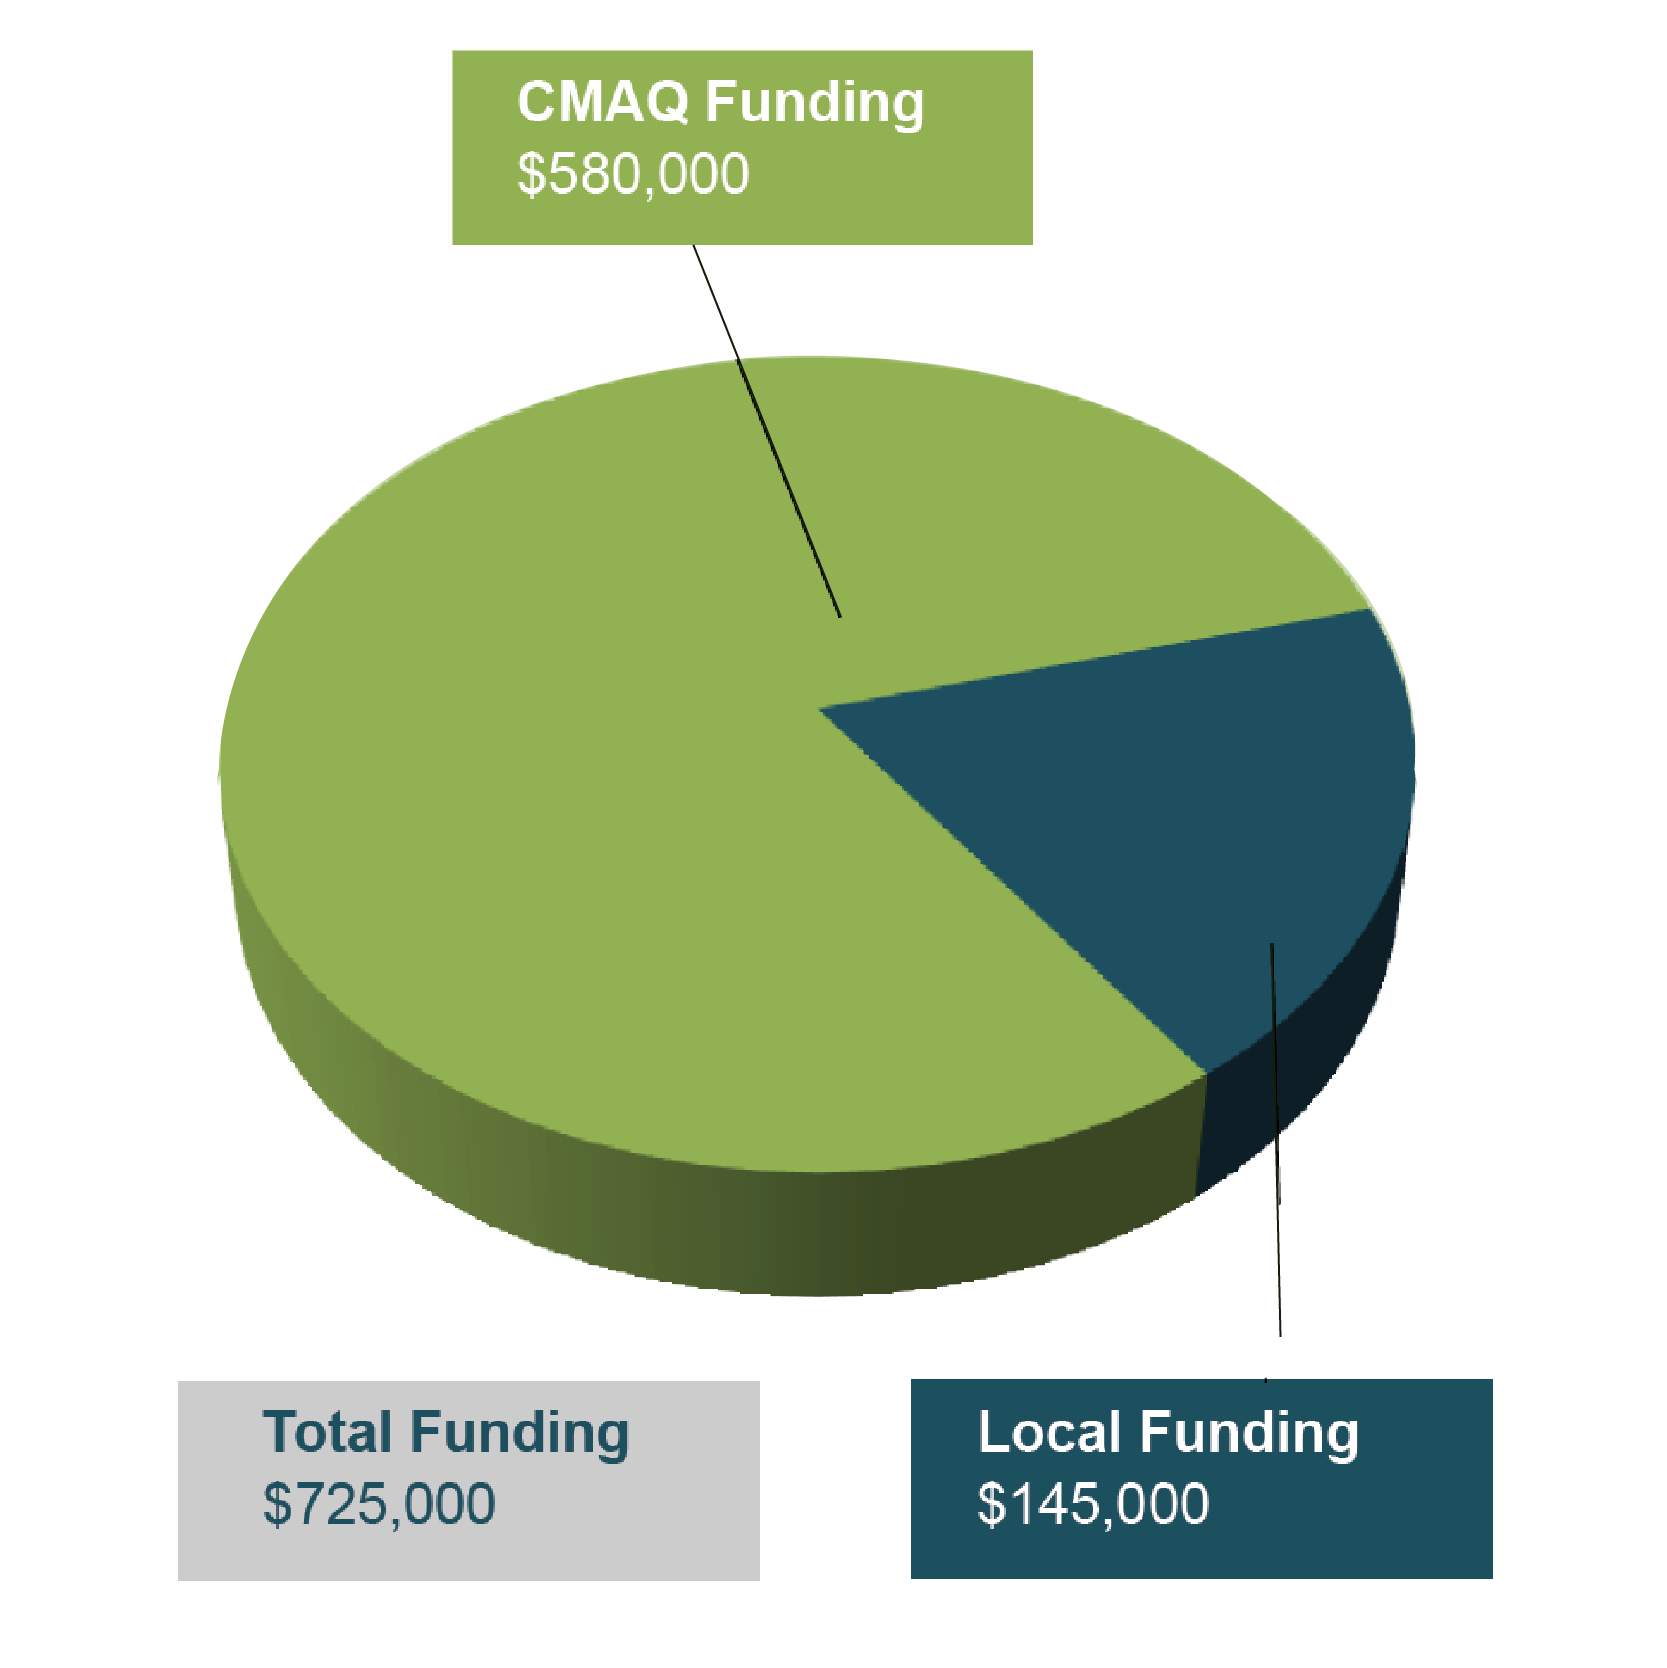 This pie chart shows $580,000 CMAQ funding and $145,000 local funding as a proportion of the total $725,000 project funding.